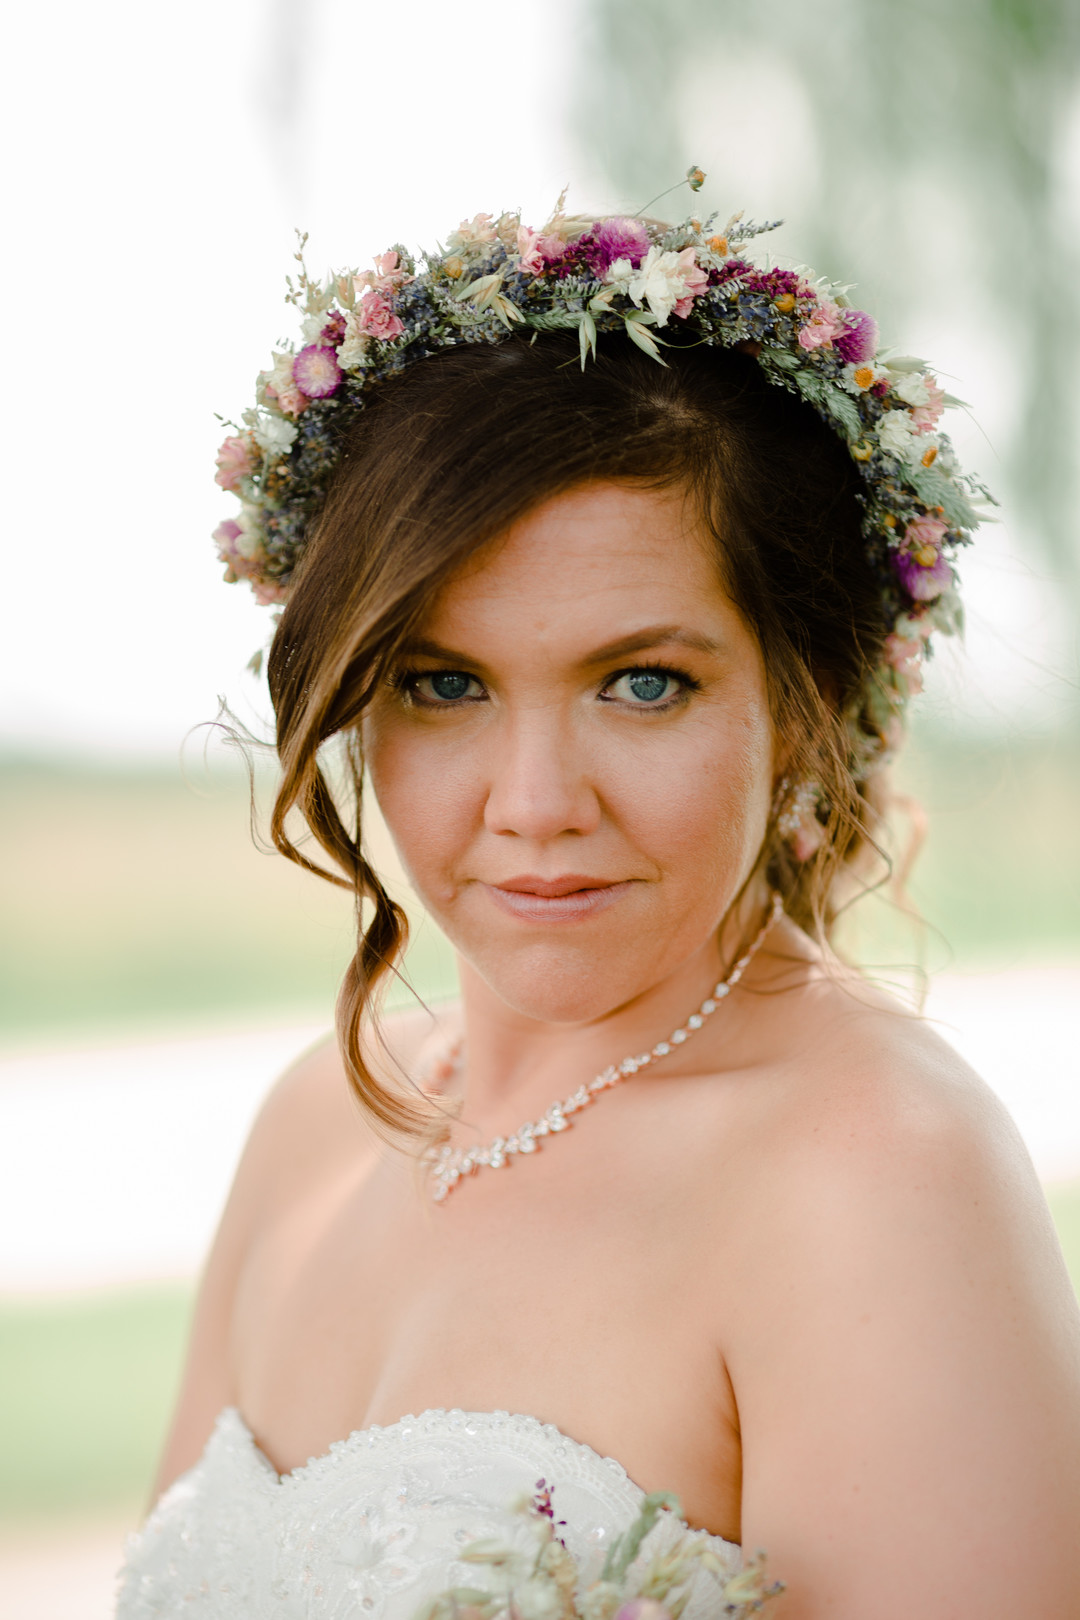 Wedding flower crown: Rustic country wedding in Minooka, IL captured by Katie Brsan Photography. Visit CHItheeWED.com for more wedding inspiration!